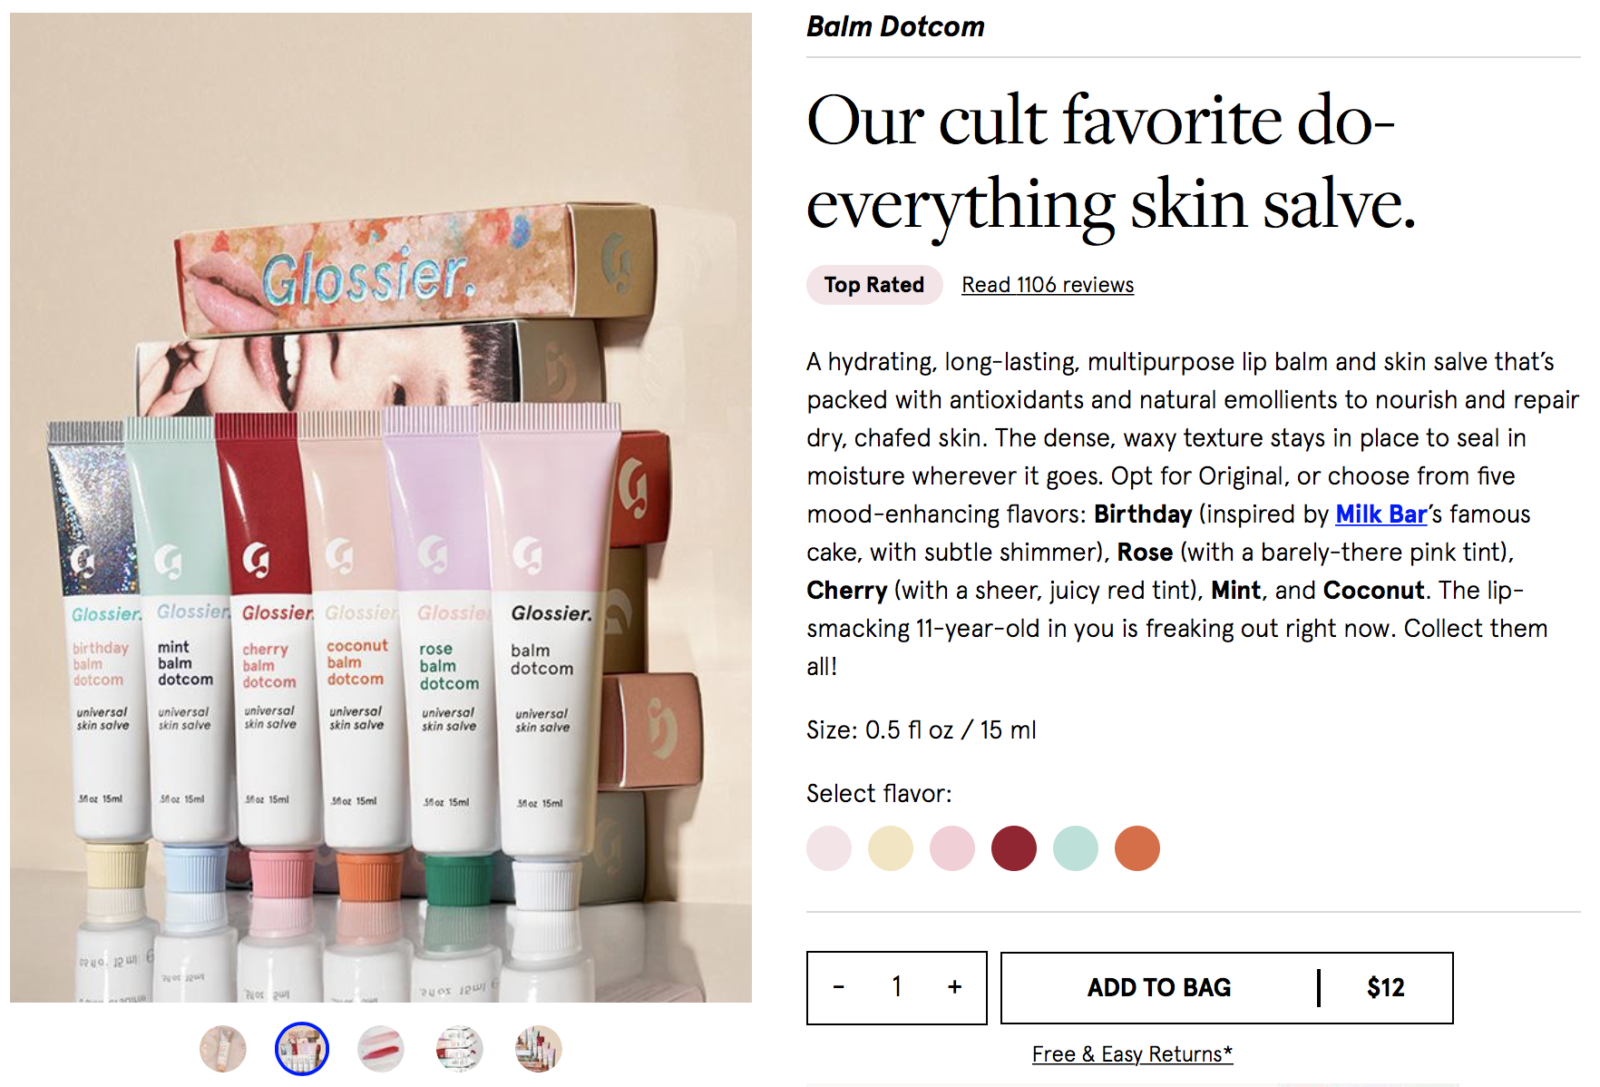 I Tried 3 Glossier Products & Here's What I Thought of Them, balm Dotcom review